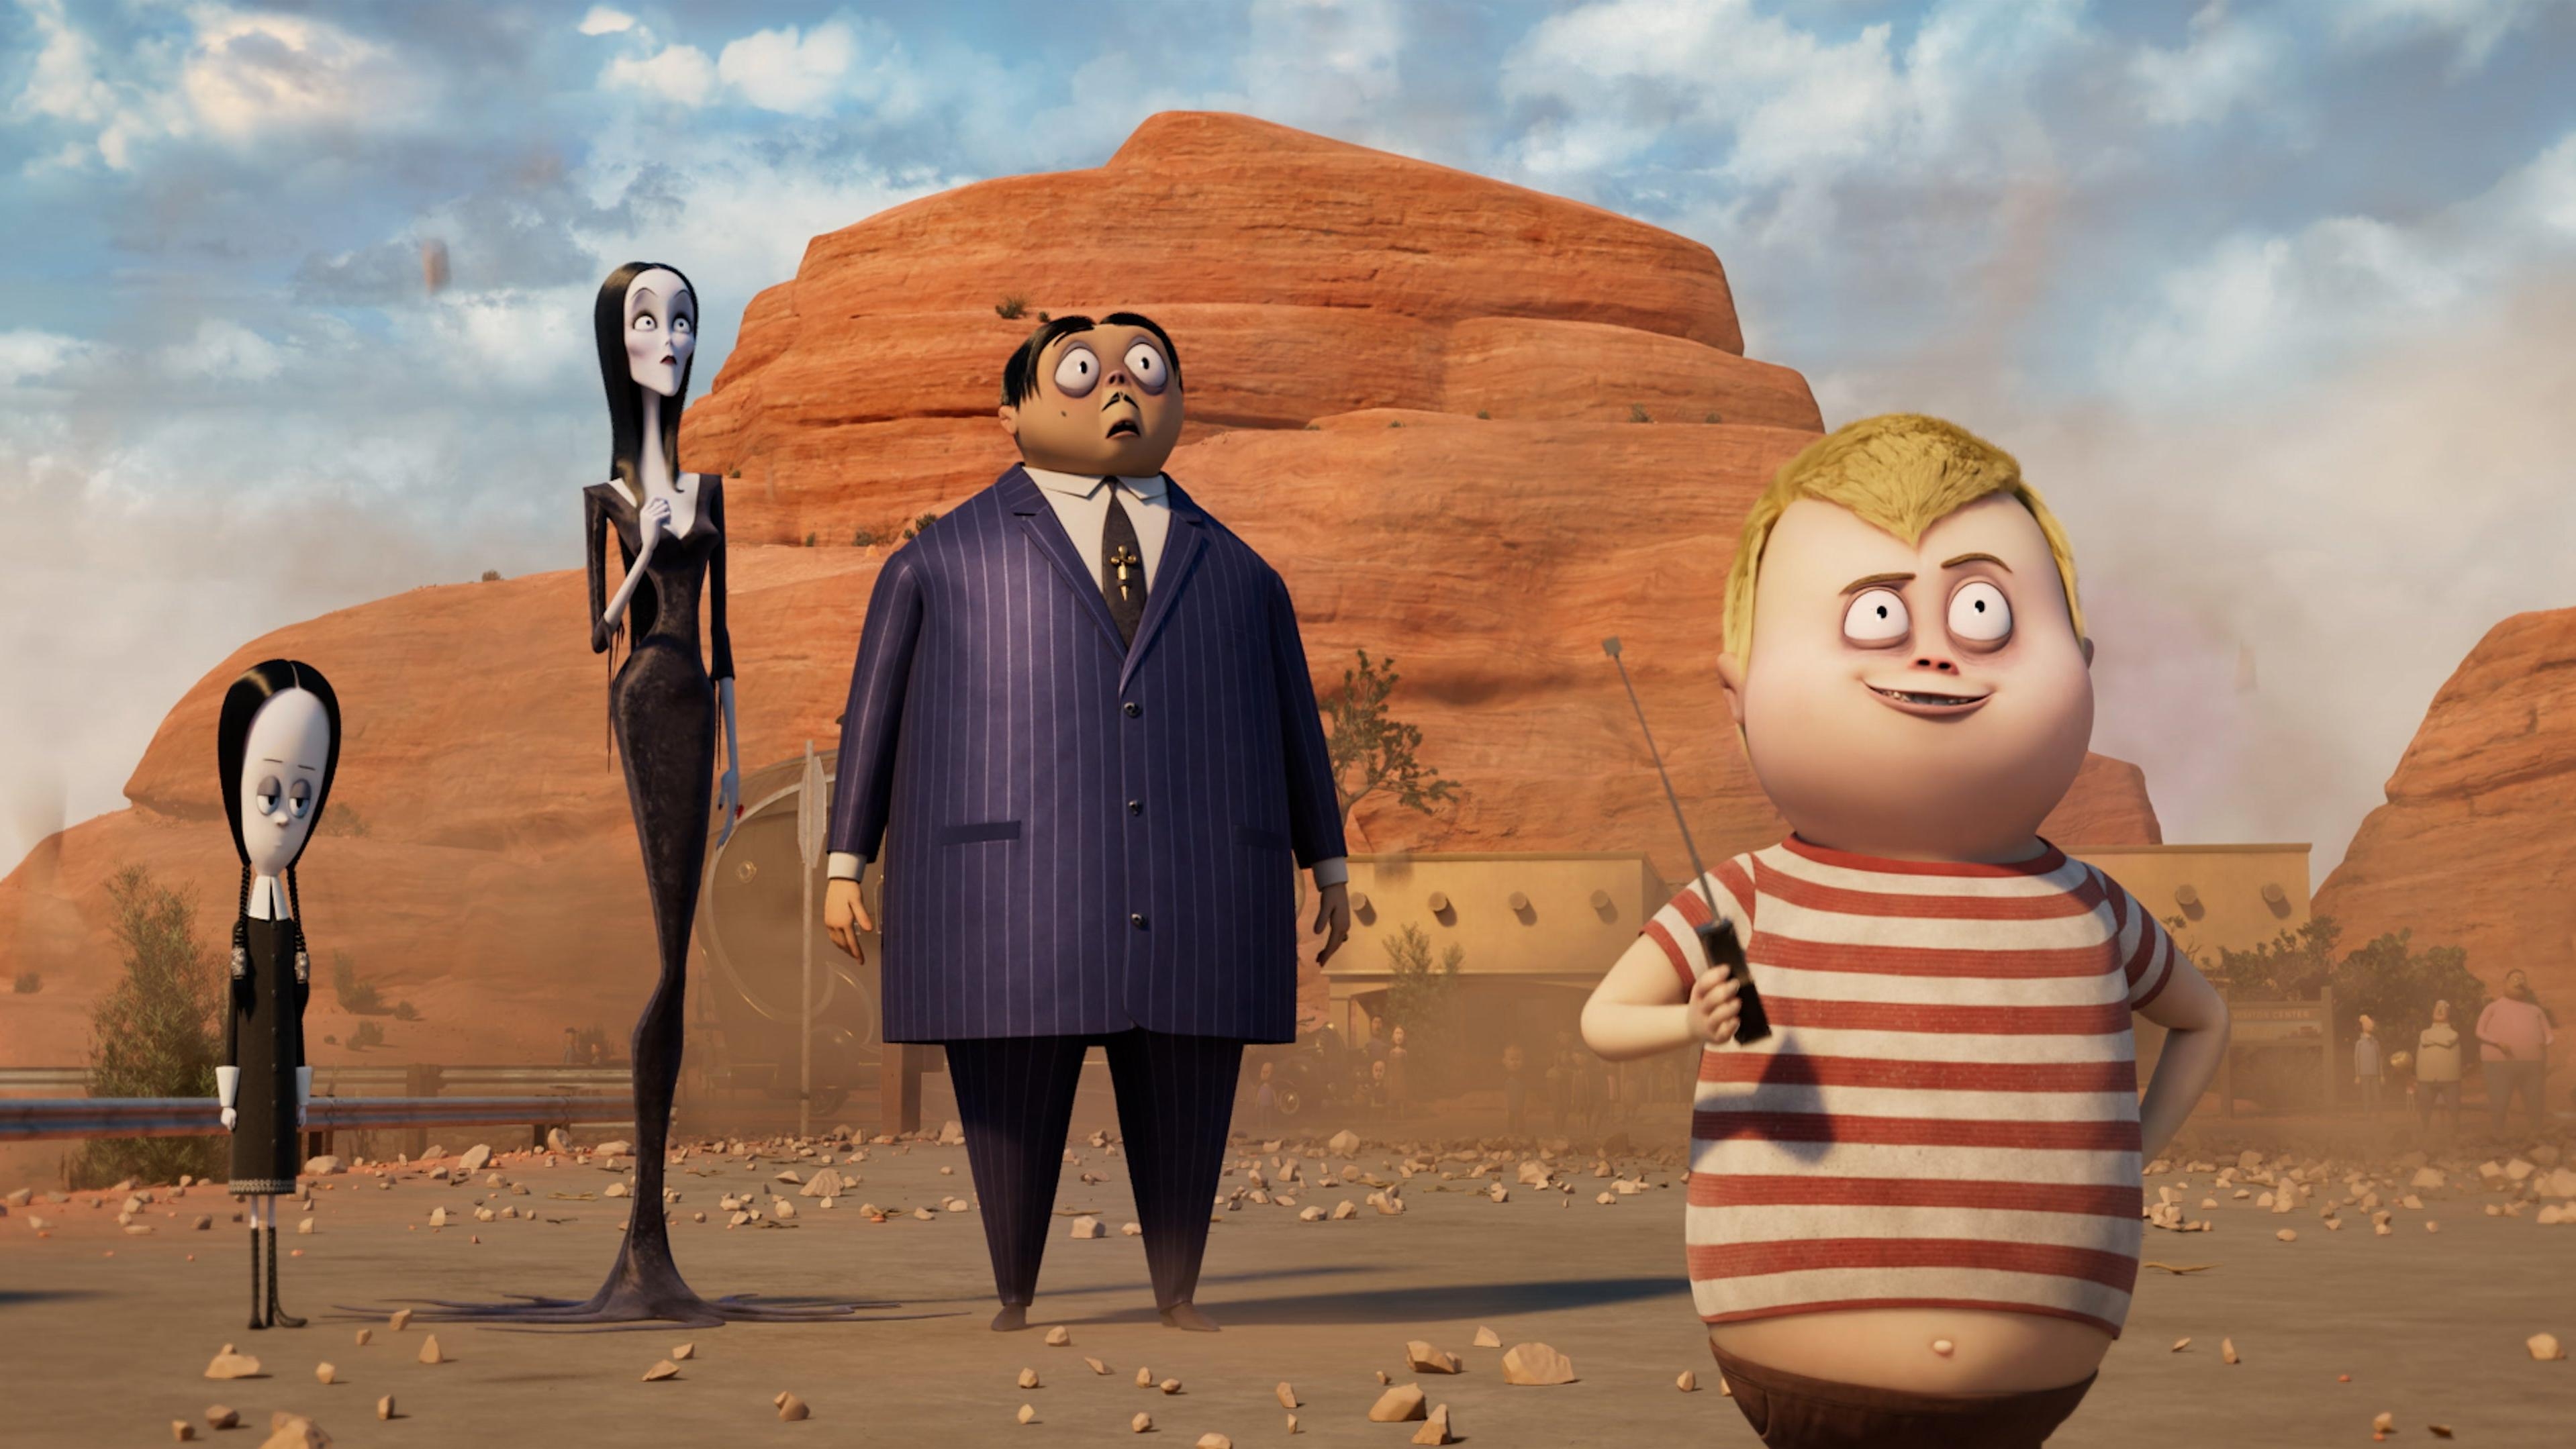 The dire animated Addams Family 2 could use more kooky and spooky